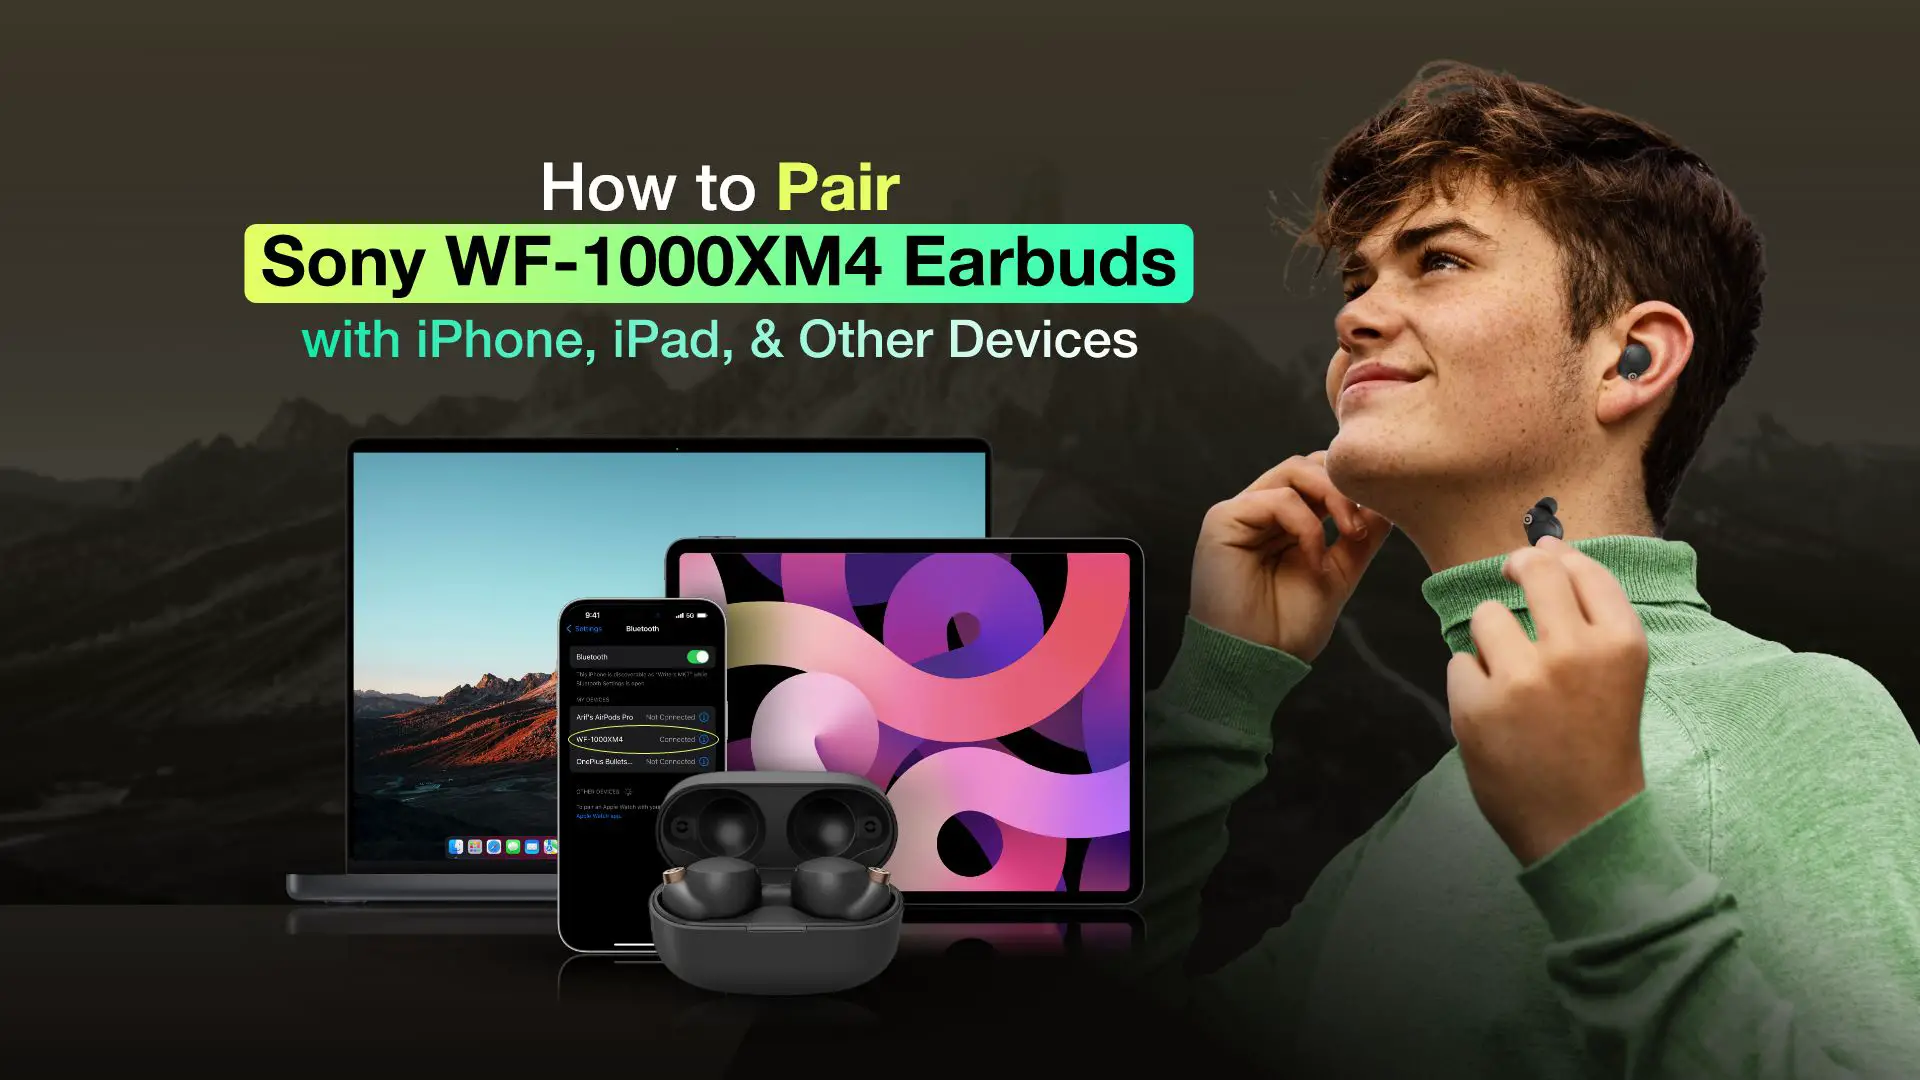 How to Pair Sony WF-1000XM4 Earbuds with iPhone, iPad, & Other Devices